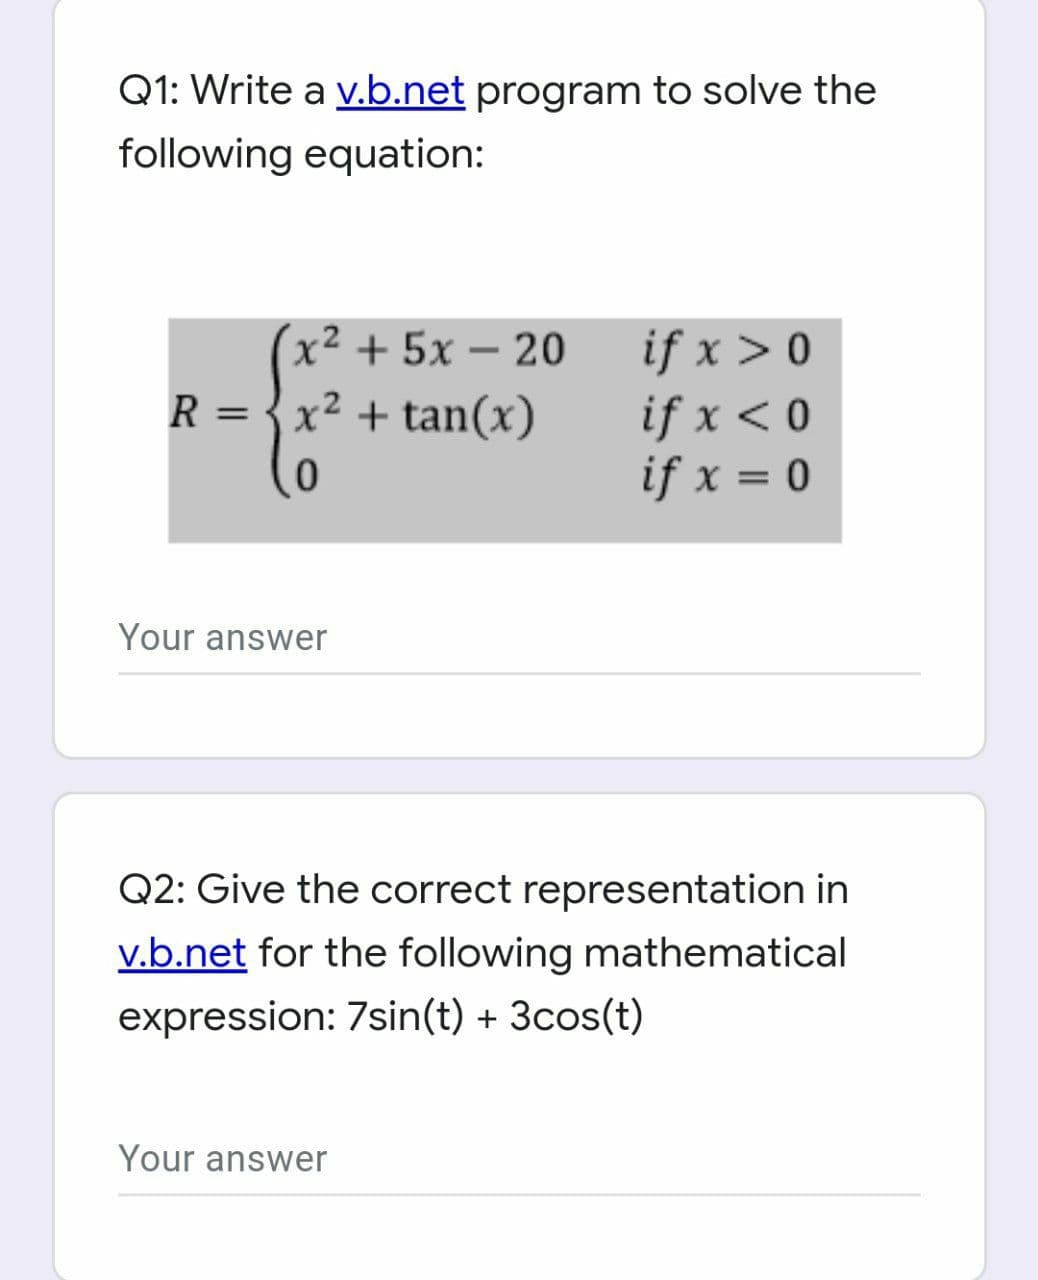 Q1: Write a v.b.net program to solve the
following equation:
x2 + 5x – 20
if x > 0
if x < 0
if x = 0
R = {x² + tan(x)
Your answer
Q2: Give the correct representation in
v.b.net for the following mathematical
expression: 7sin(t) + 3cos(t)
Your answer
